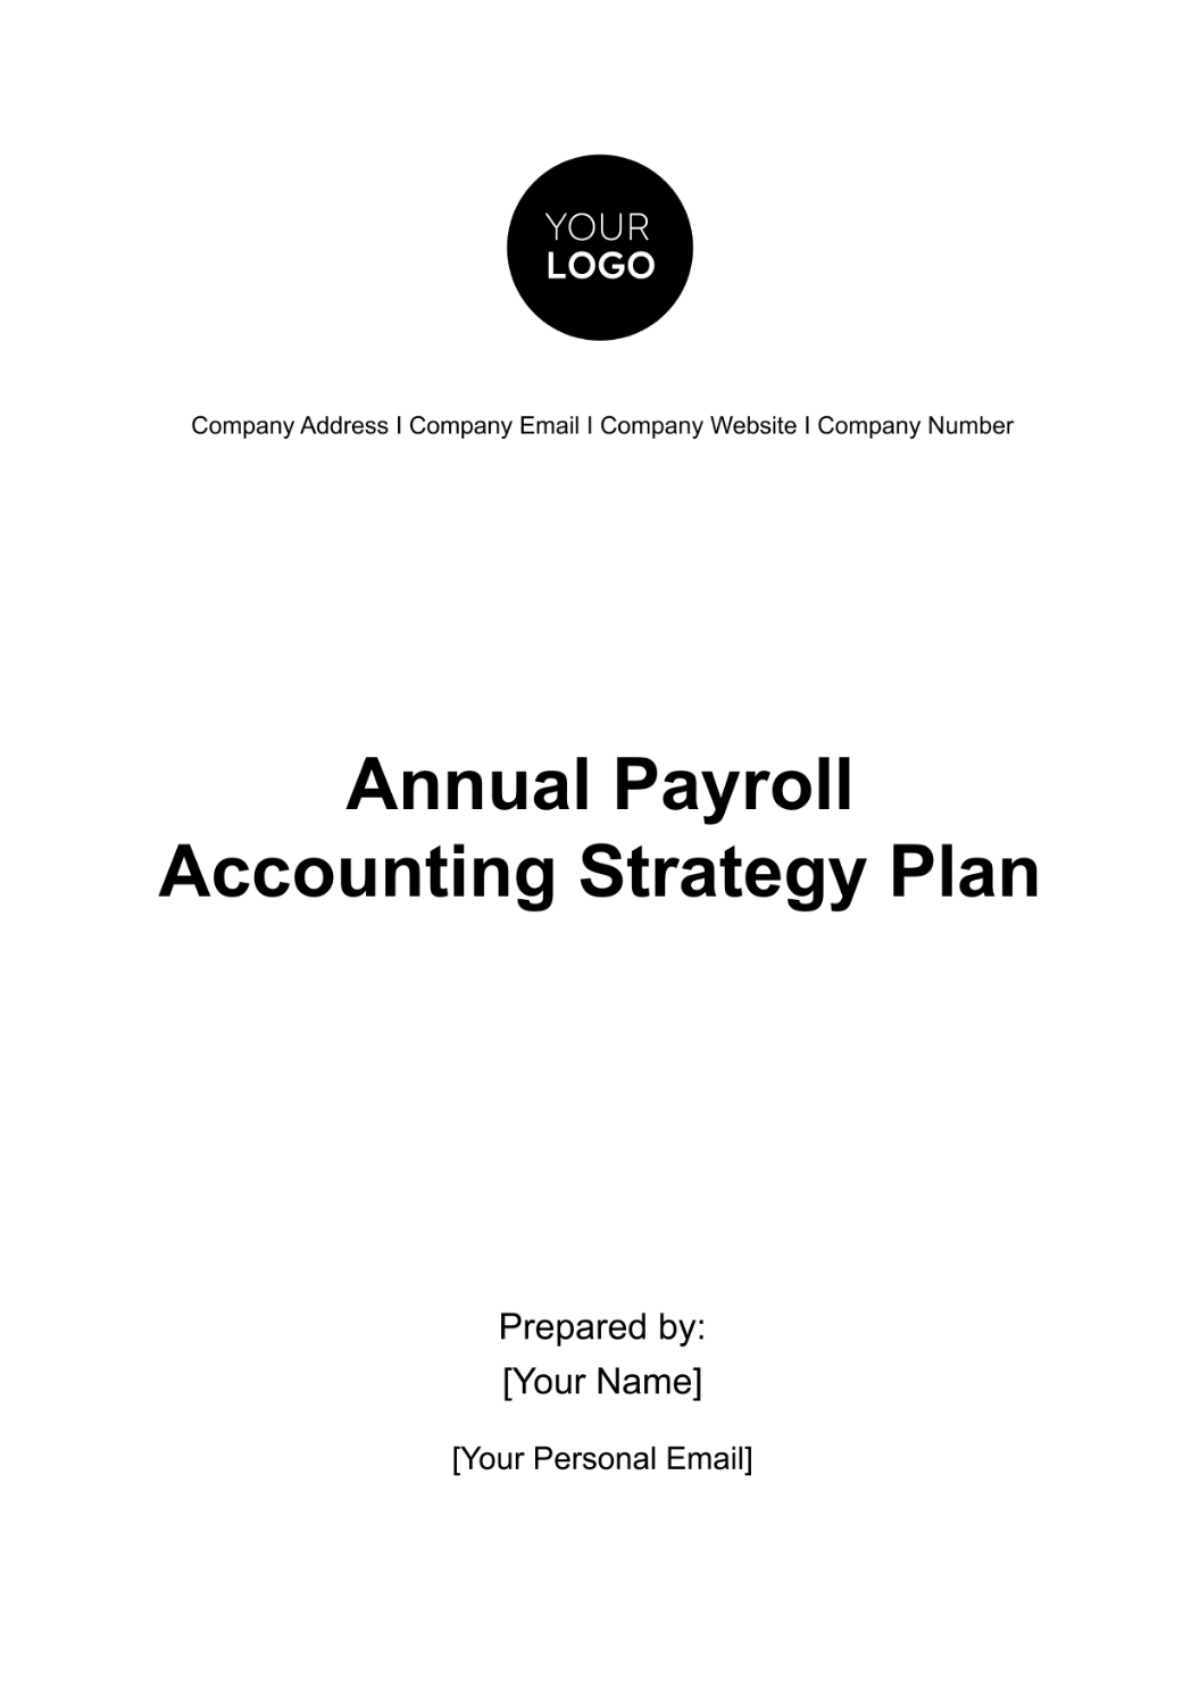 Free Annual Payroll Accounting Strategy Plan Template